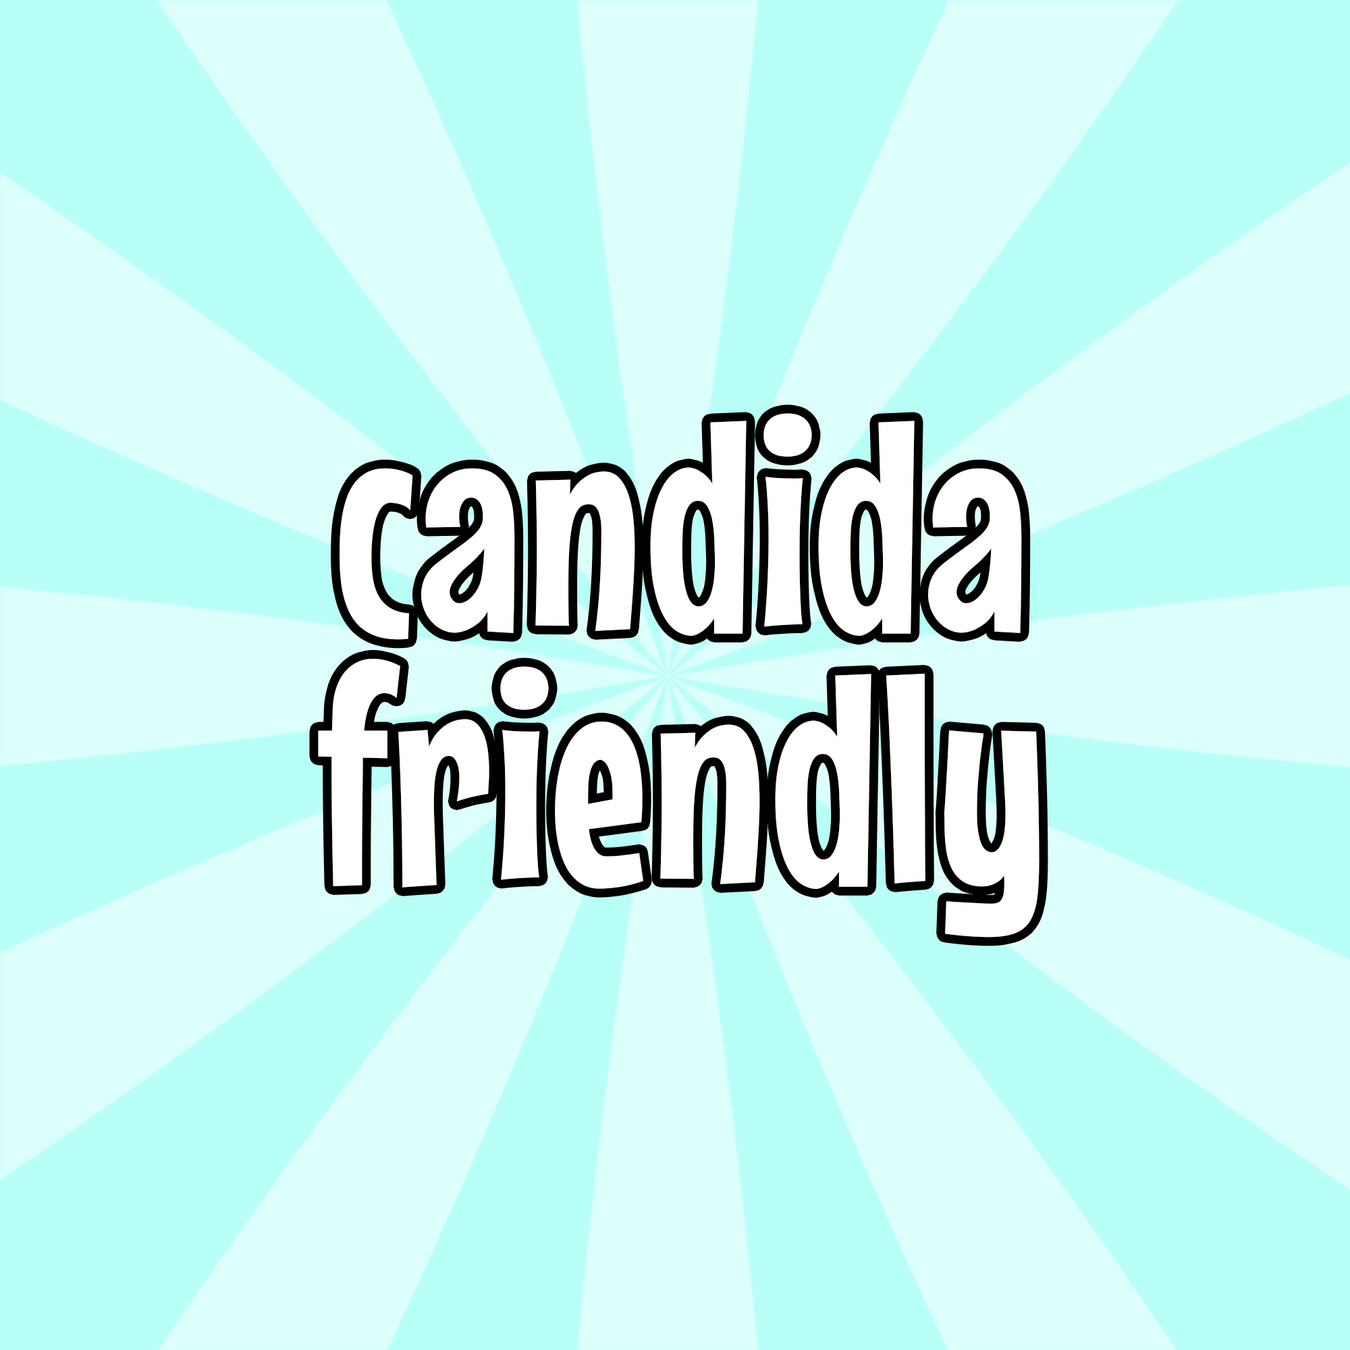 CANDIDA-friendly Sugarfree, Glutenfree, Diabetic, Low Carb, Keto and Banting Products